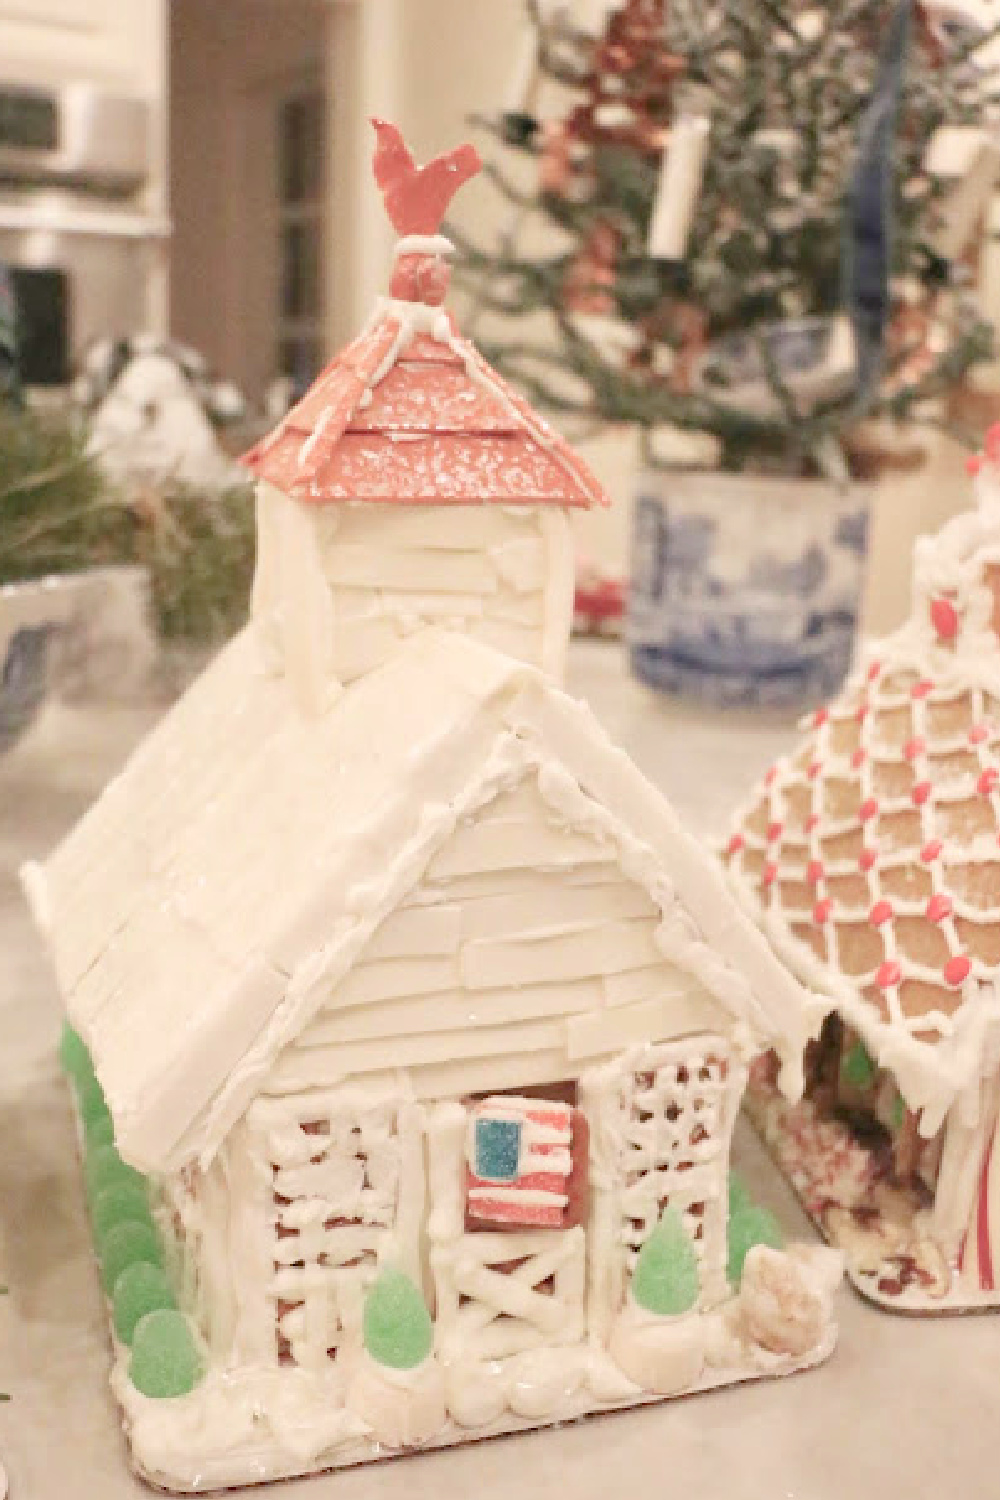 Charming white gingerbread house chicken coop with cupola (Big Red gum copper roof) and American flag - Eleven Gables. #gingerbreadhouse #christmasdiy #holidaybaking